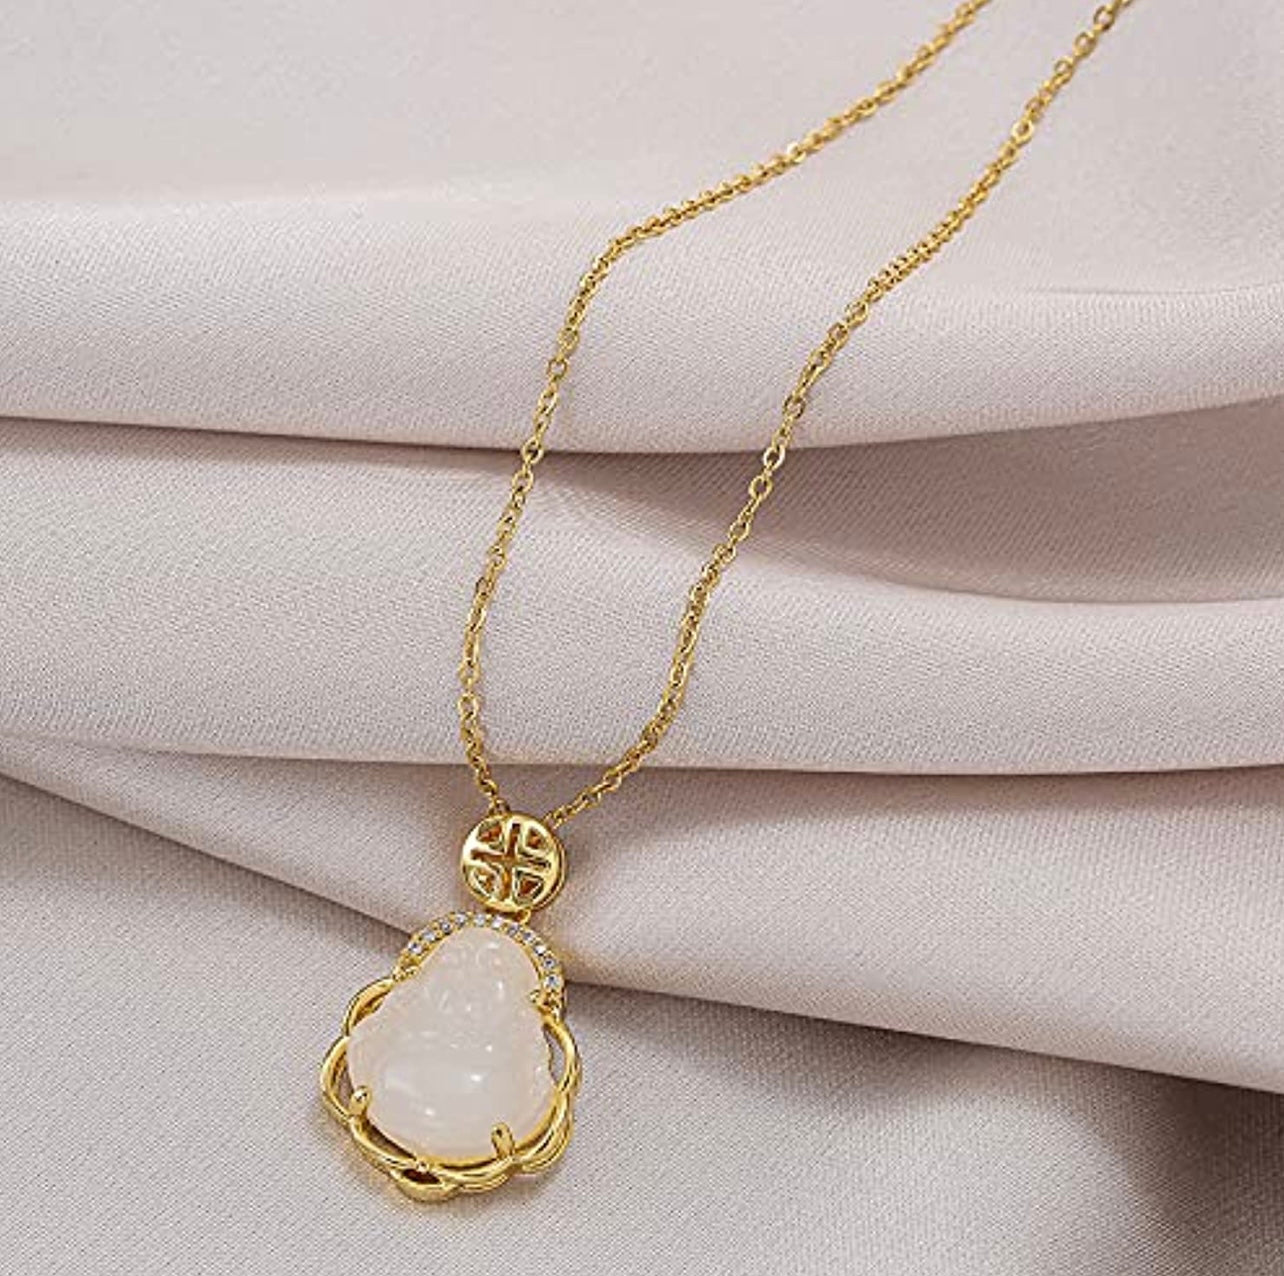 18k Gold Plated Laughing Buddha Pendant Necklace Milky Quartz